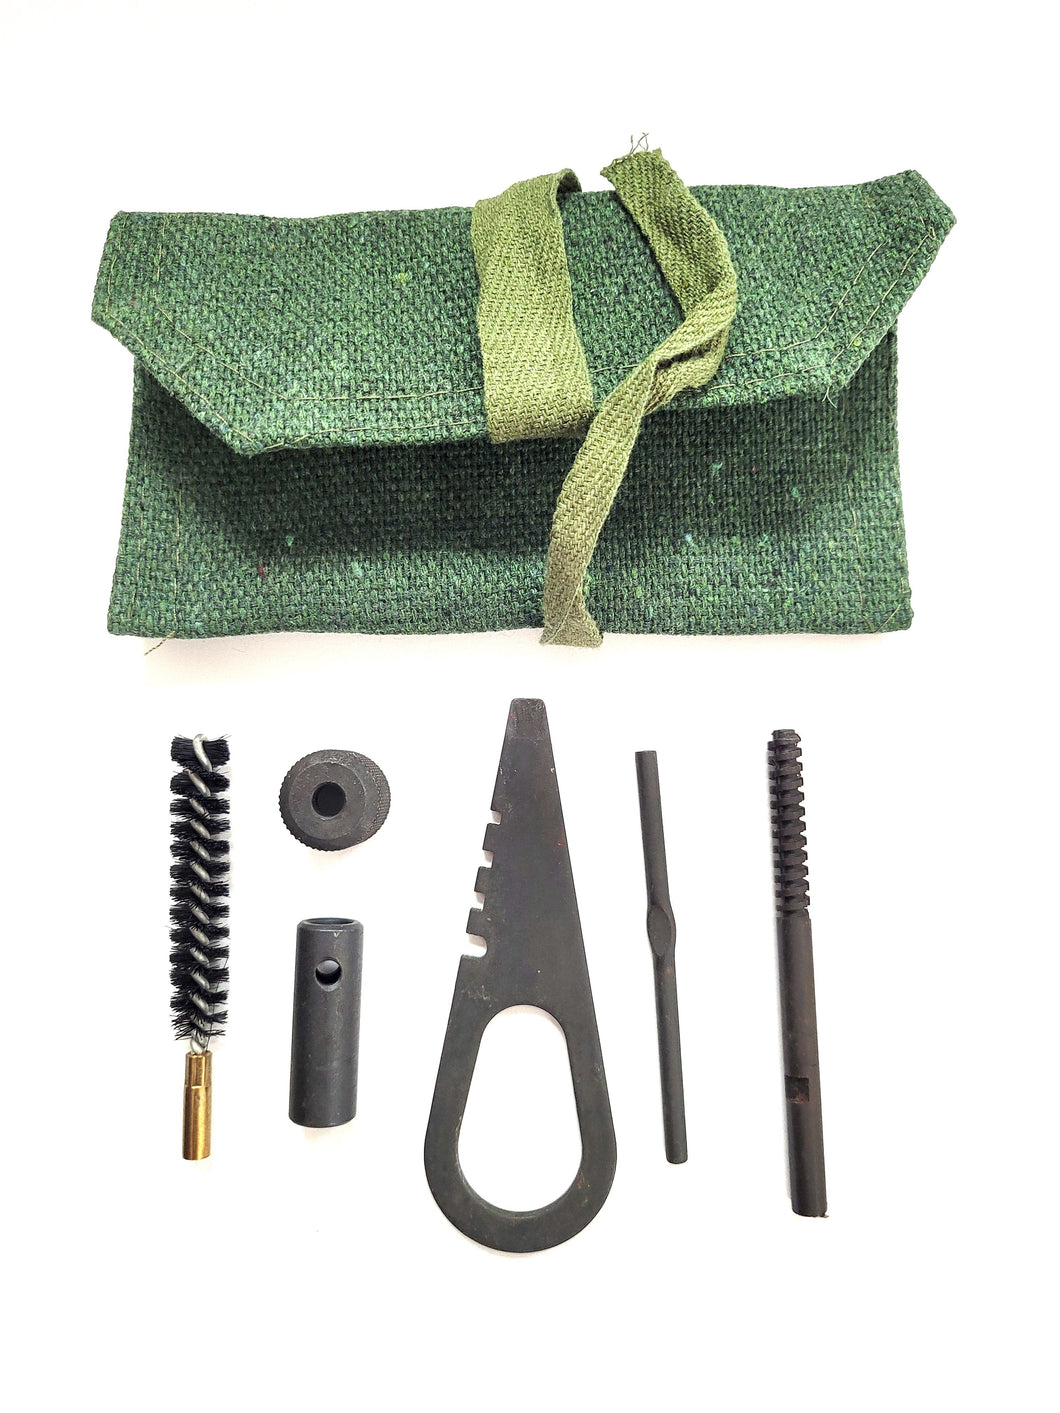 Mosin Nagant Cleaning Kit/Cleaning Tools with Pouch LR 7.62x54R